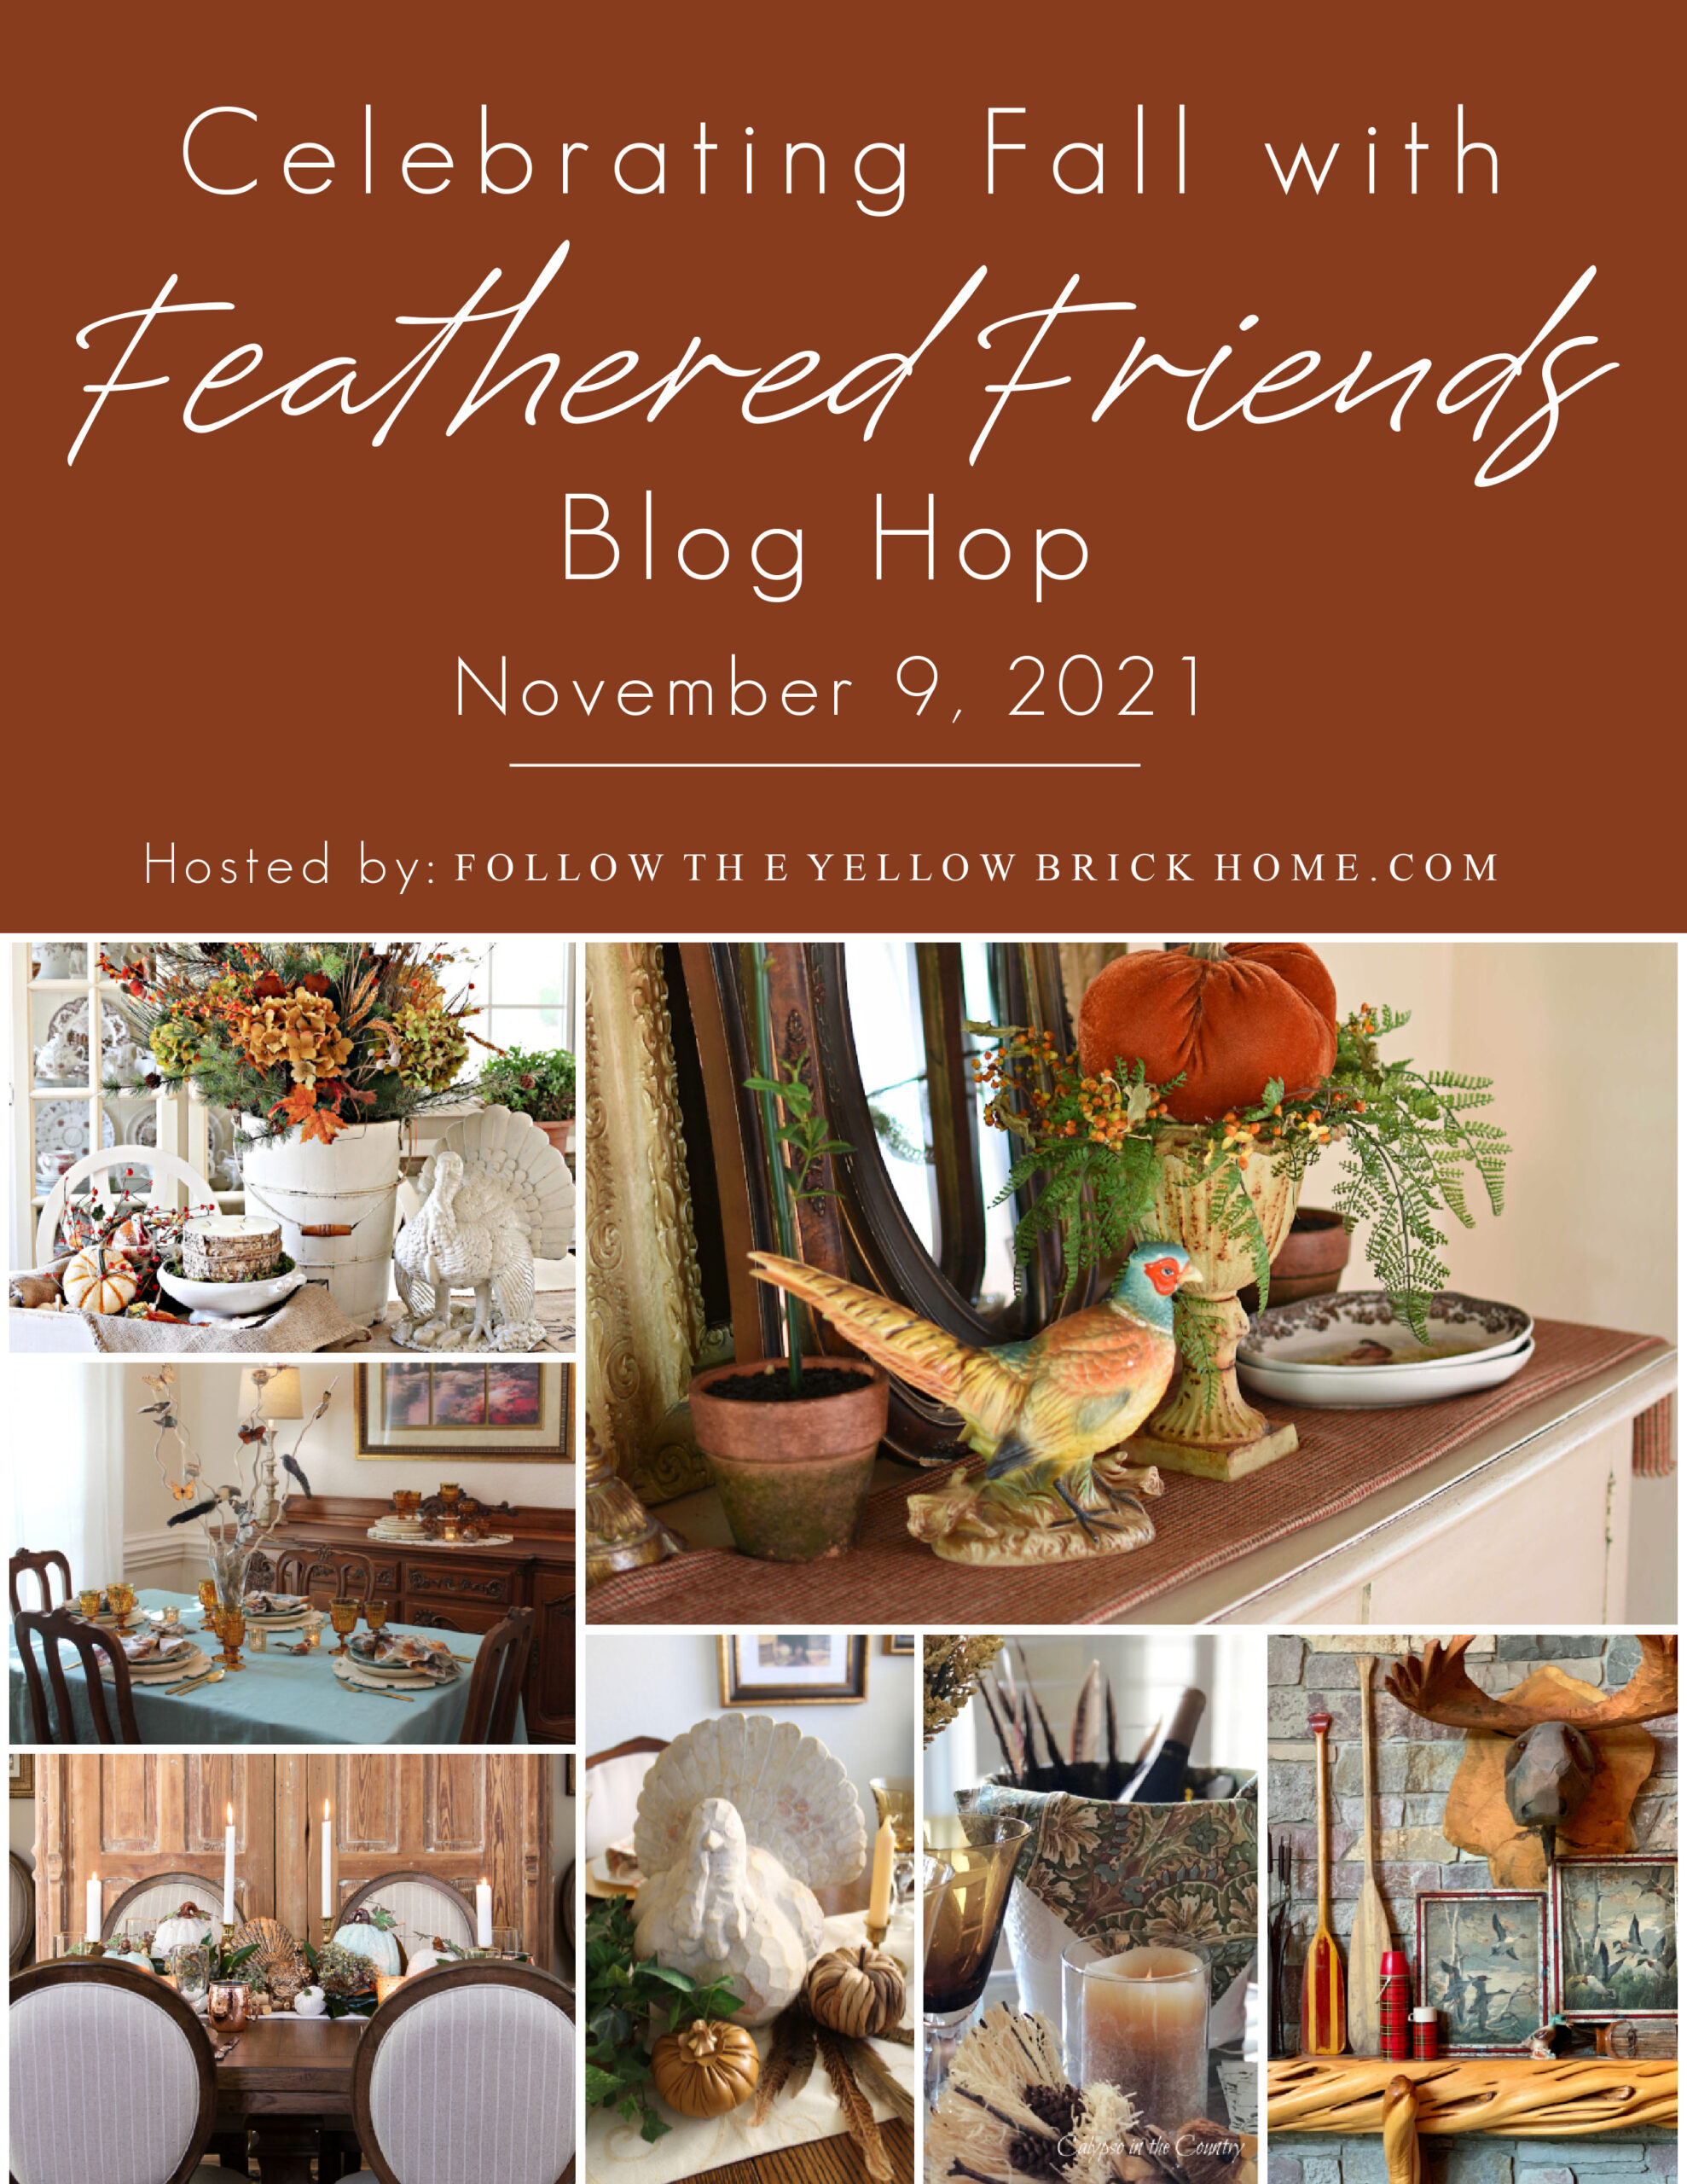 https://www.oursouthernhomesc.com/wp-content/uploads/Fall-with-Feathered-Friends-1-scaled.jpg